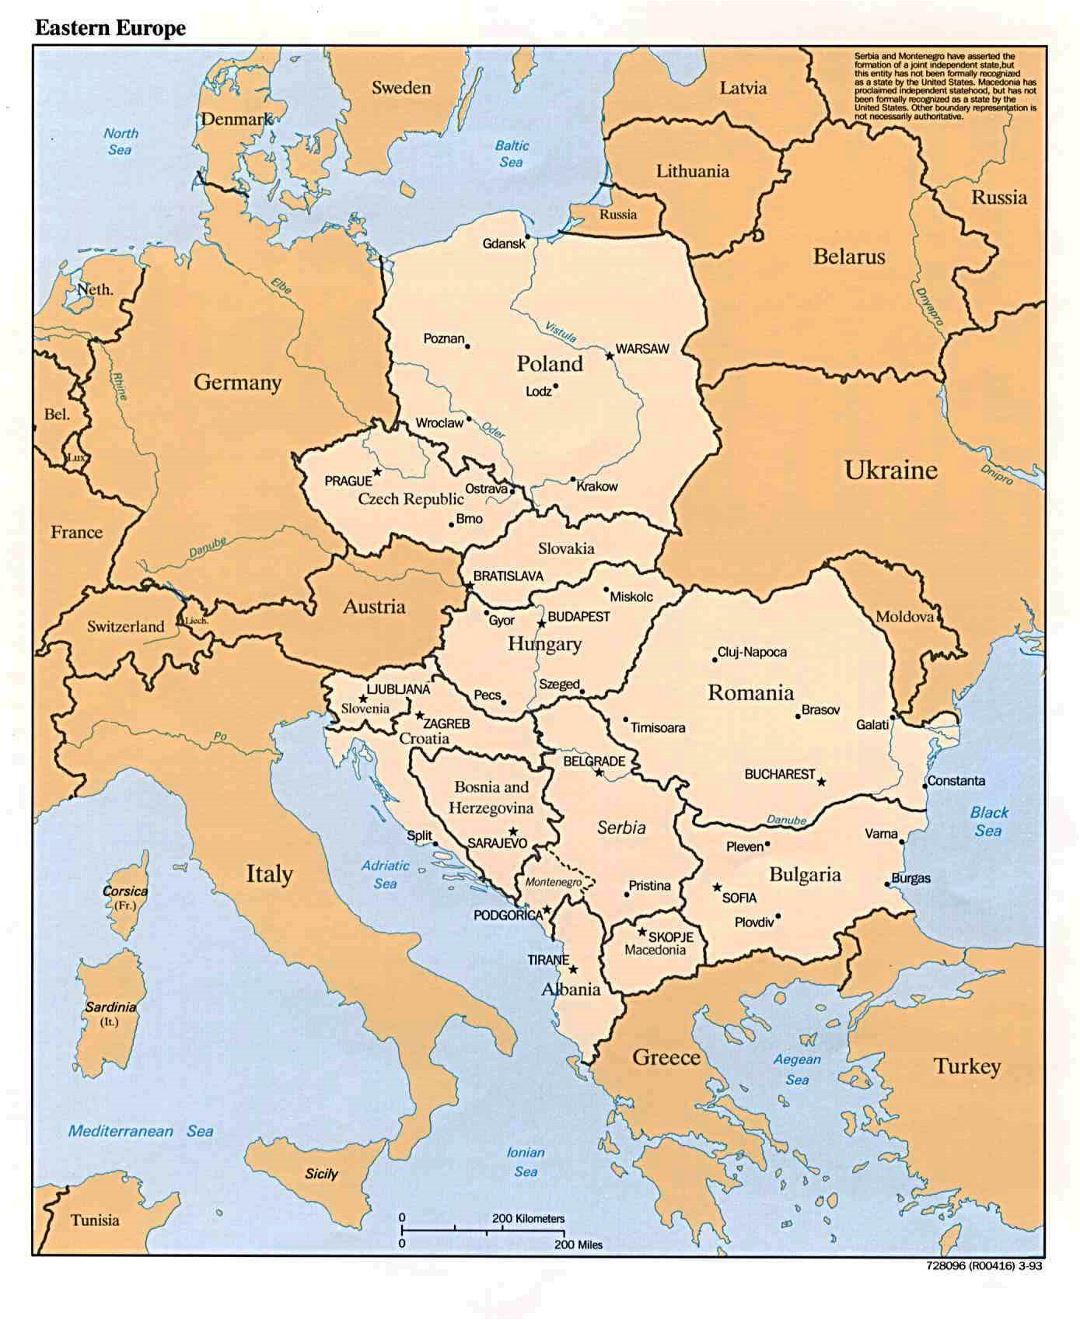 Detailed political map of Eastern Europe - 1993